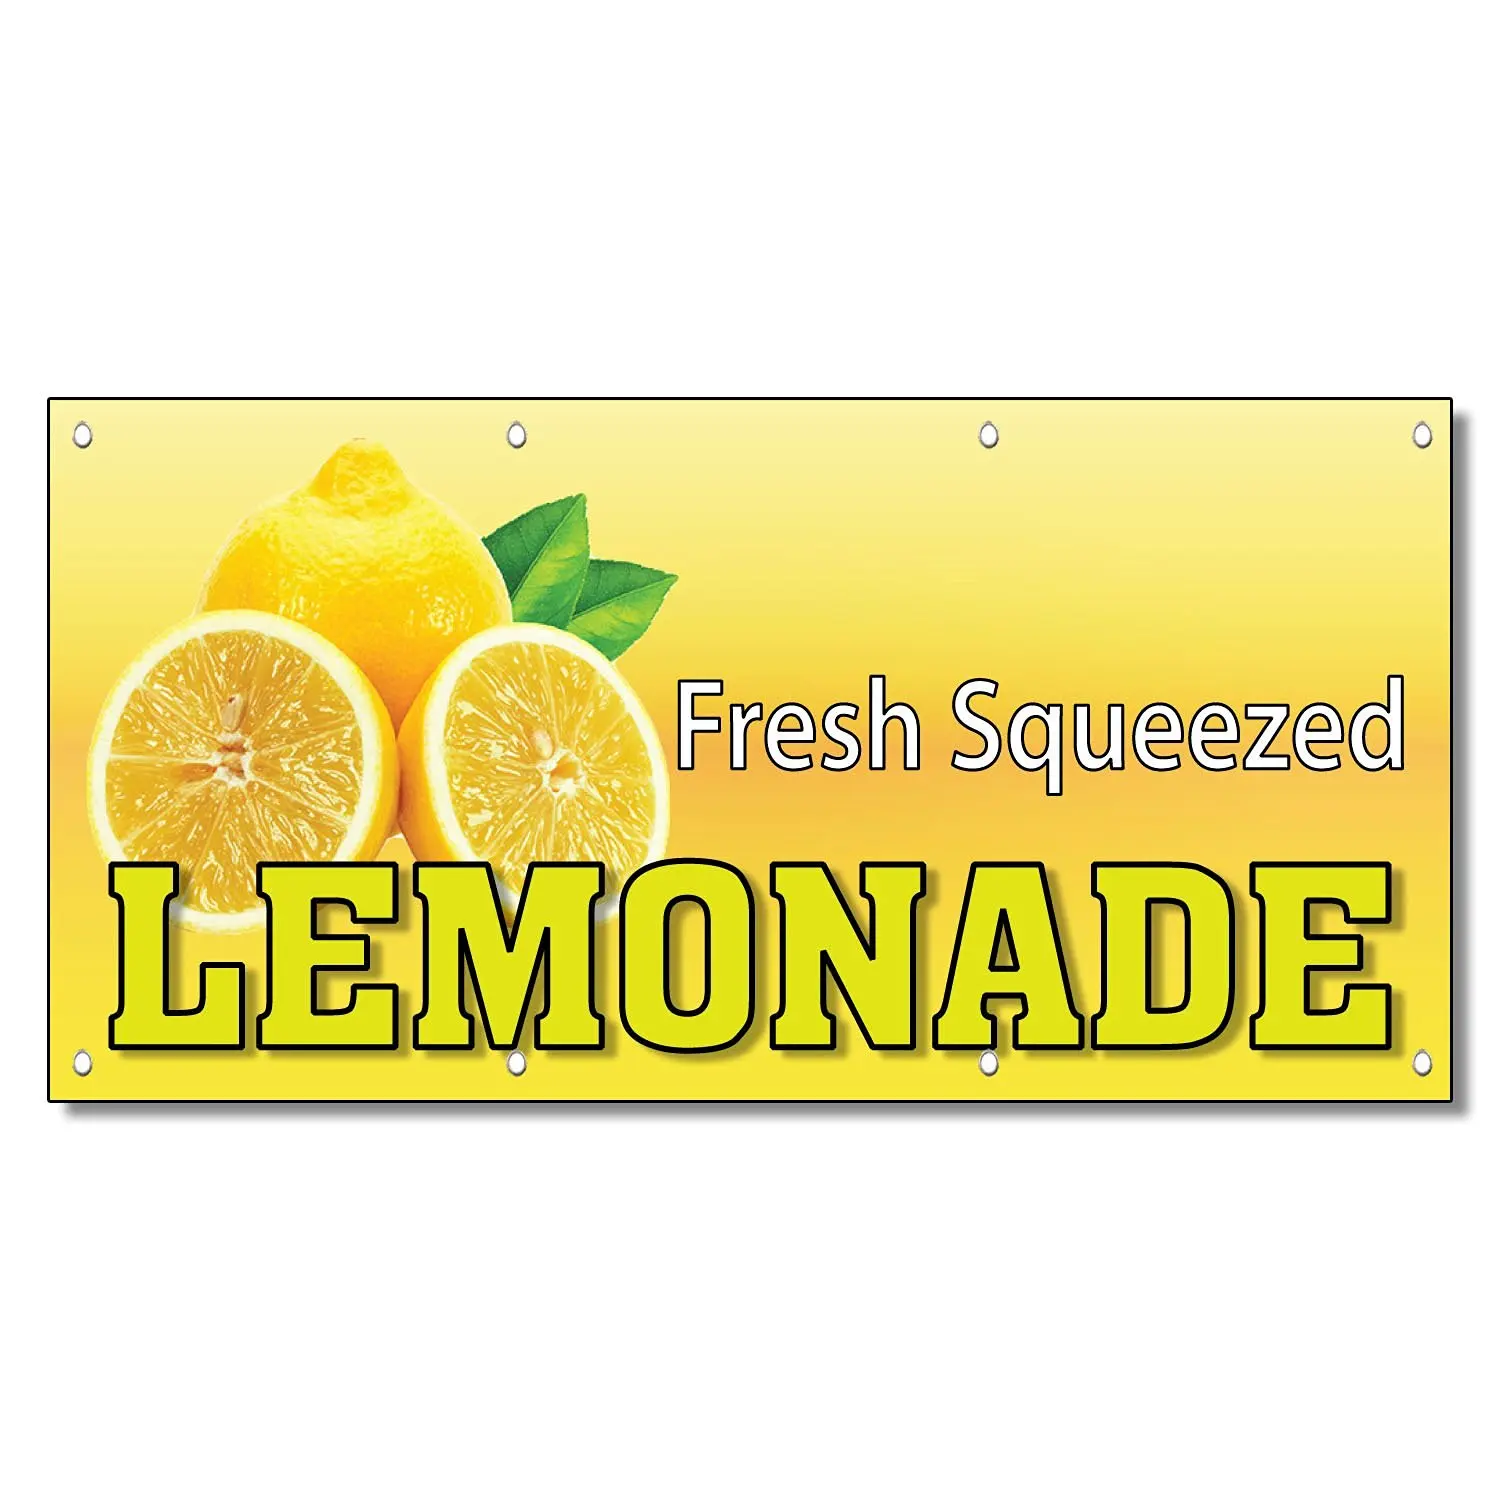 FRESH SQUEEZED LEMONADE Vinyl Banner Concession Food Sign 1x10 ft yb